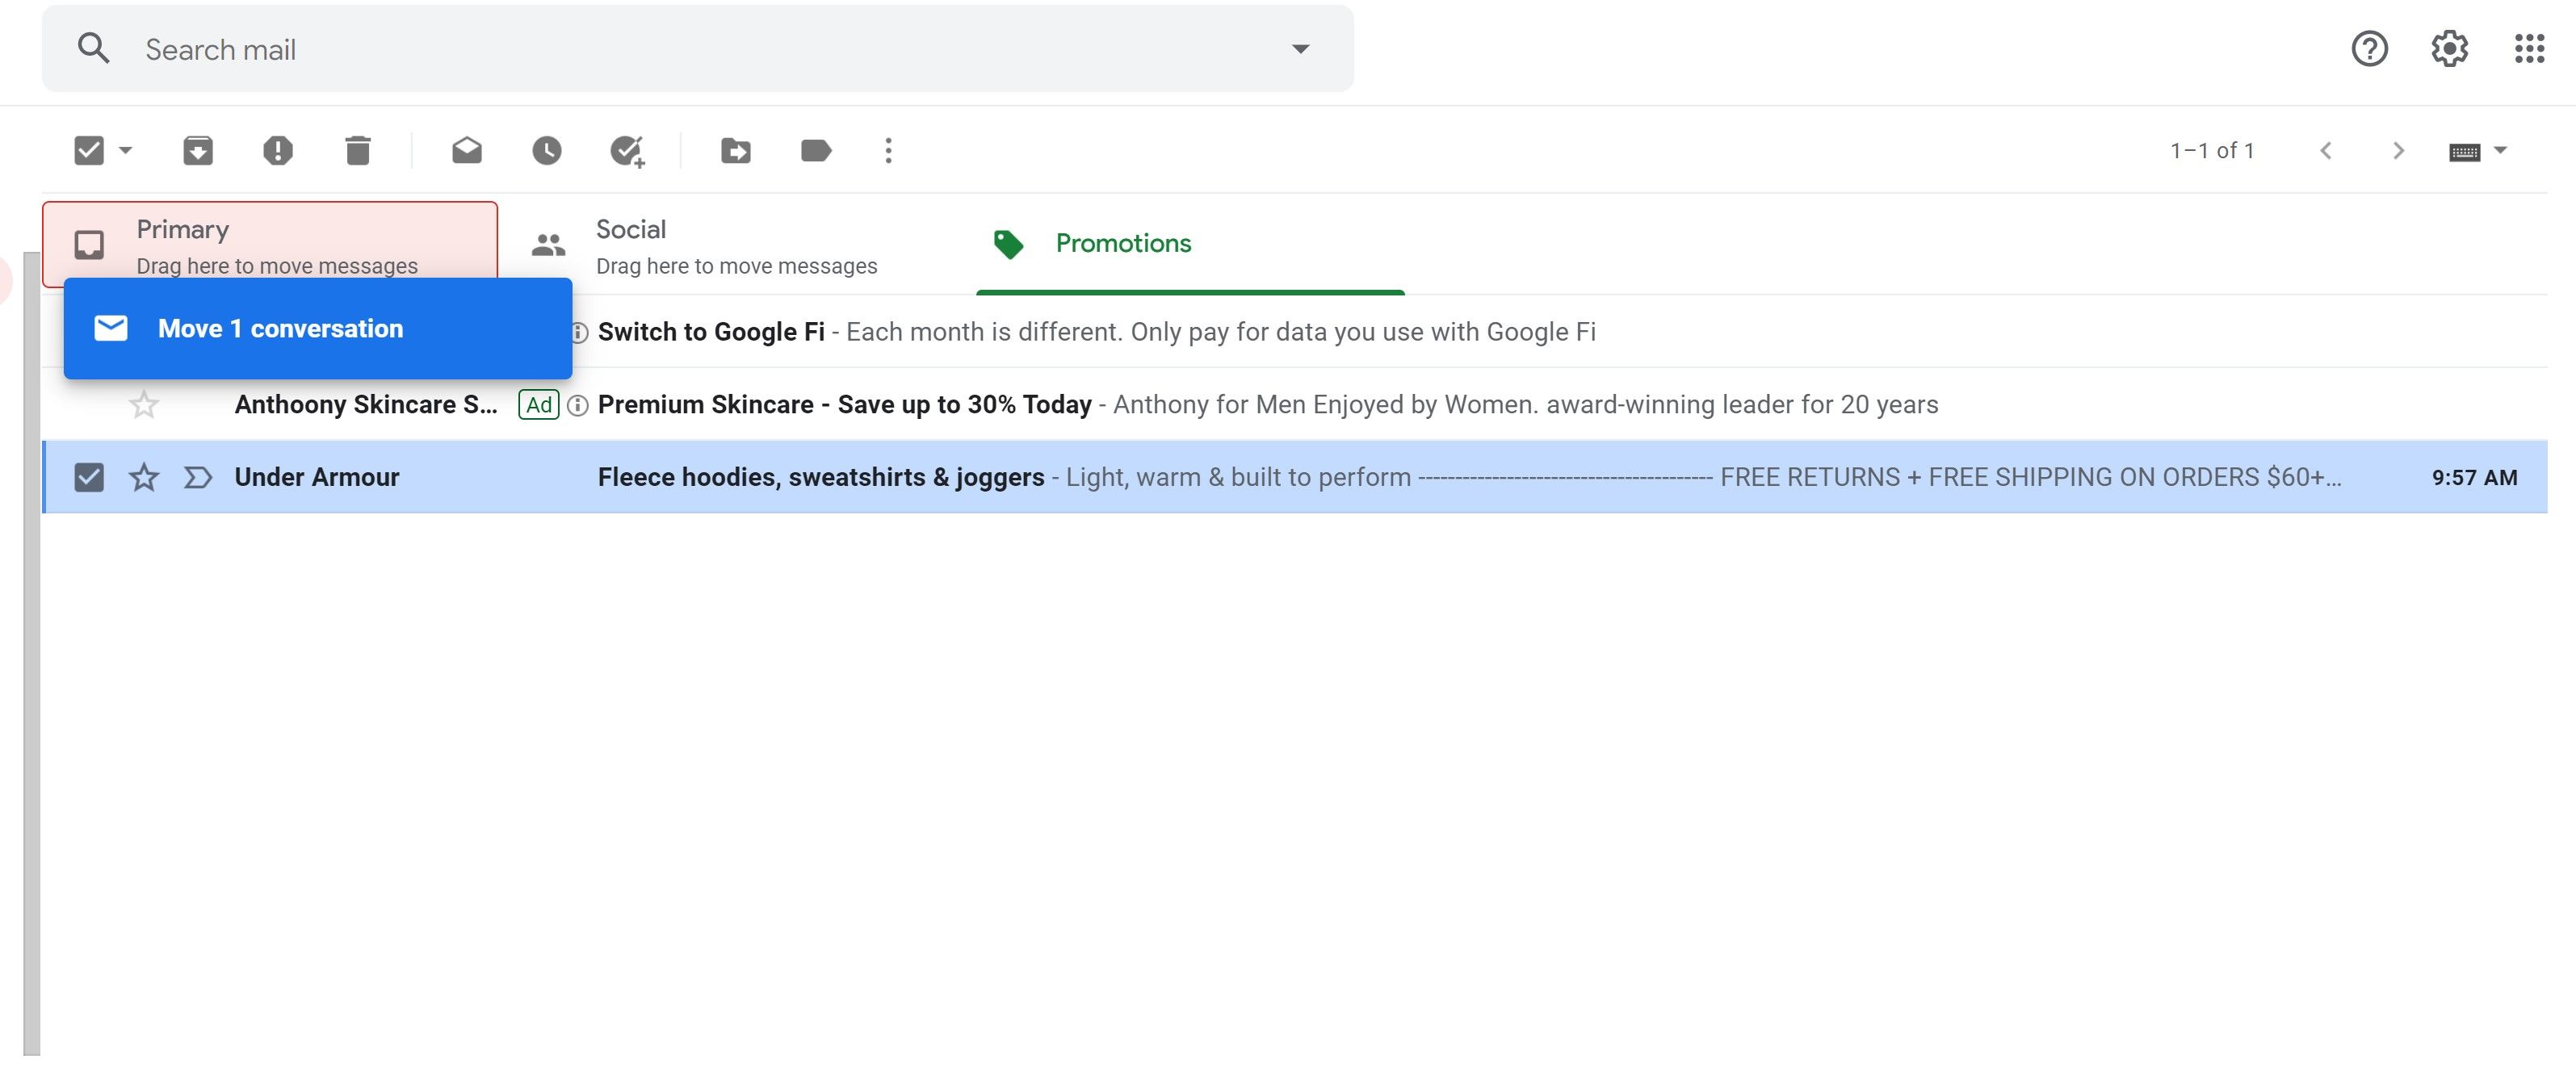 dragging email from promotions to primary gmail